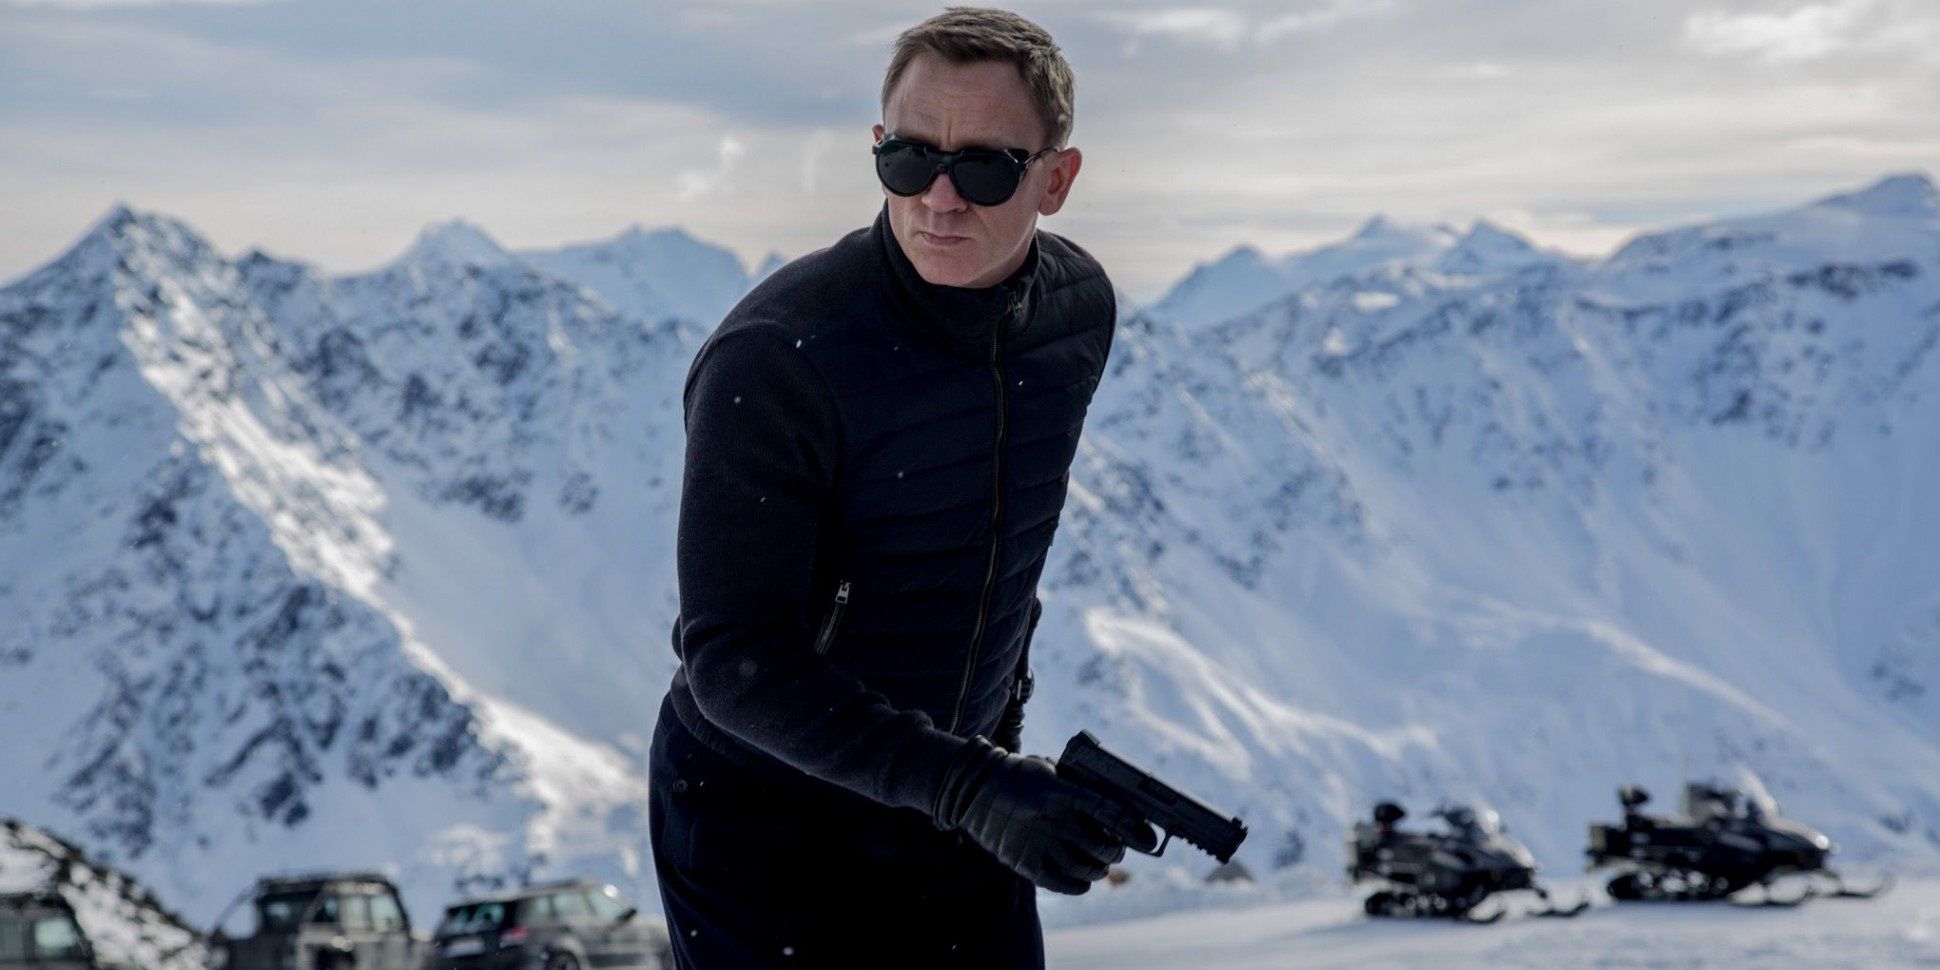 James Bond standing in the snow with a gun in Spectre